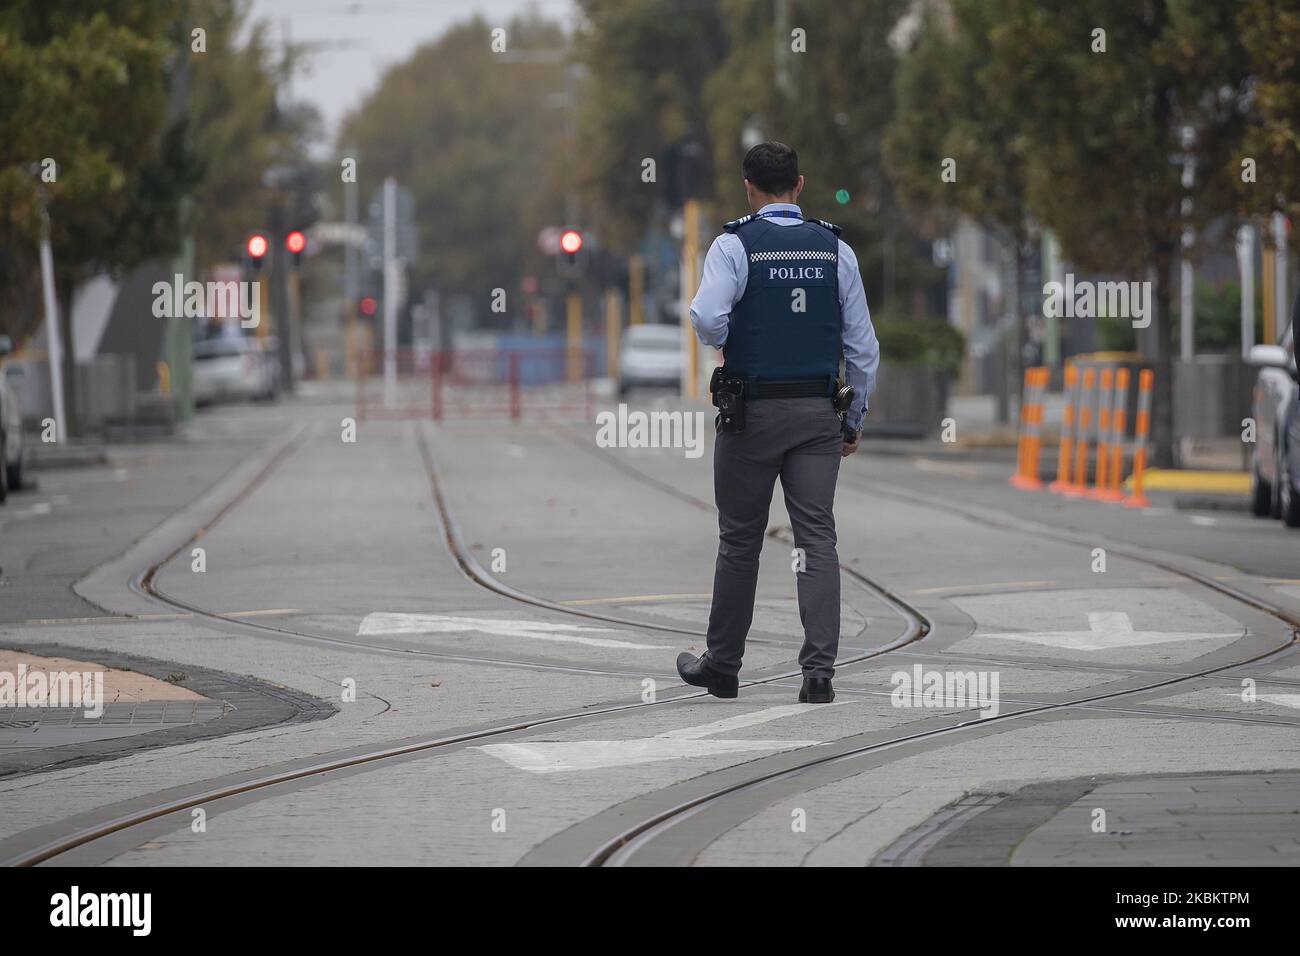 A police officer patrols an empty street in Christchurch, New Zealand, on April 01, 2020.Â New Zealand has been lockdown for four weeksÂ in an attempt to minimize the spread of the Covid-19 virus since the 25th of March. There are currently 708 cases of COVID-19 in New Zealand and one person died as a result of the virus.Â Â (Photo by Sanka Vidanagama/NurPhoto) Stock Photo